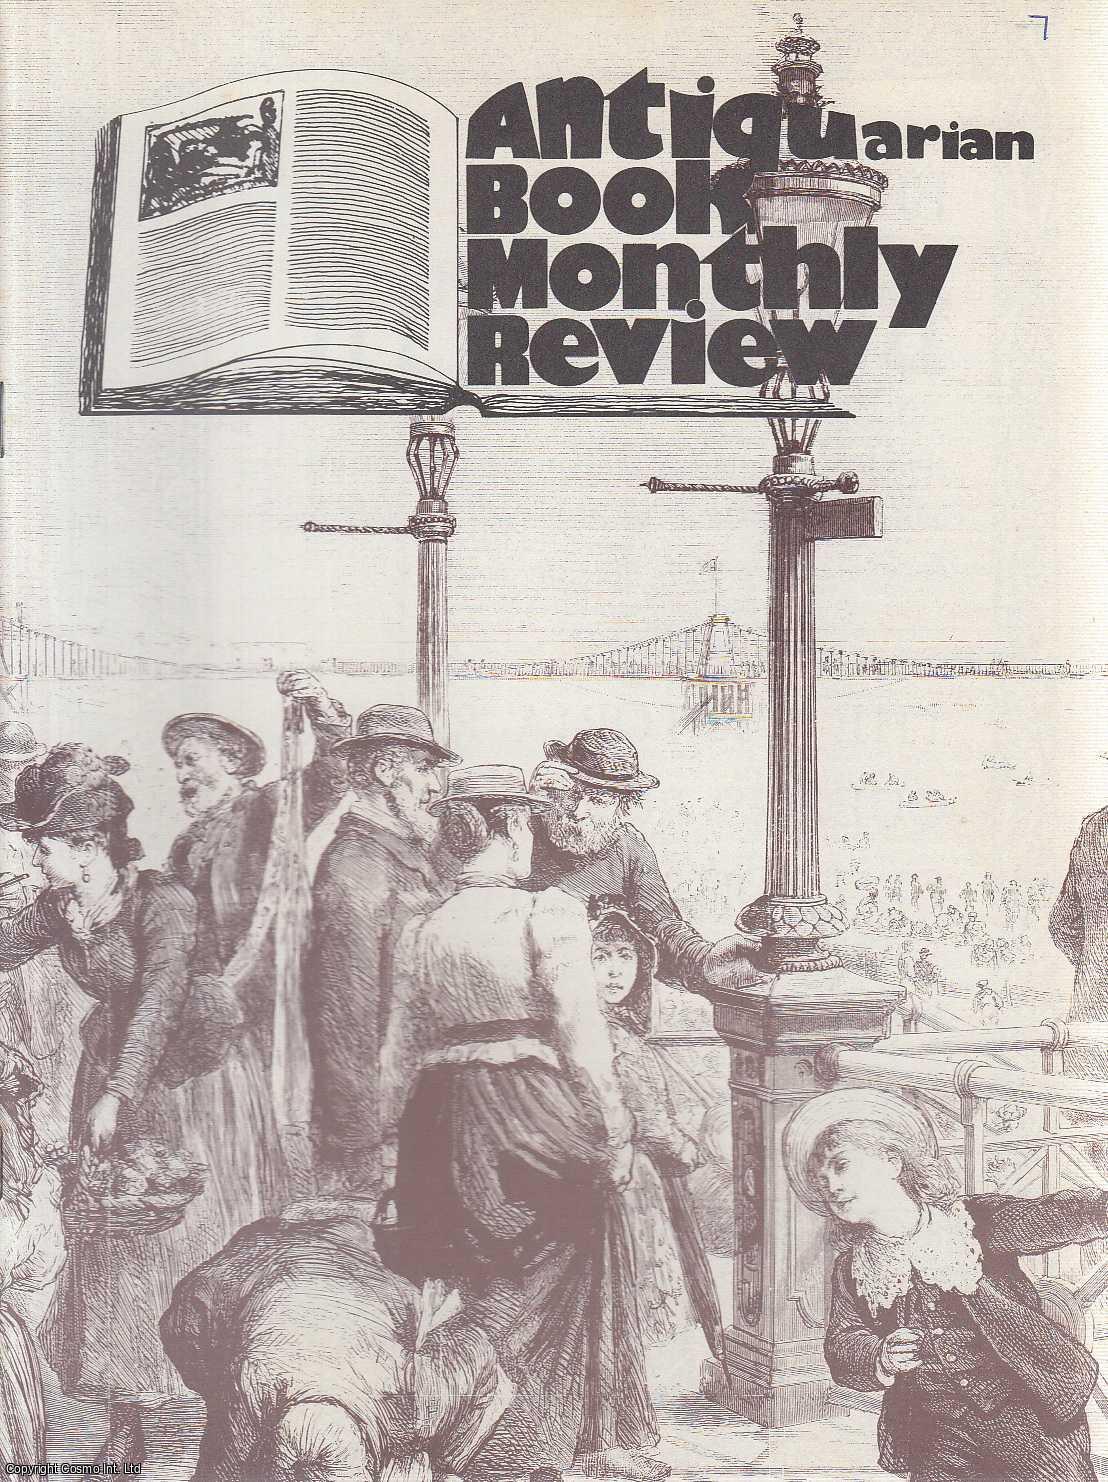 Unstated - The Nothmann Affair. The collapse of the Covent Garden Bookshop. An original article contained in a complete monthly issue of the Antiquarian Book Monthly Review, 1974.